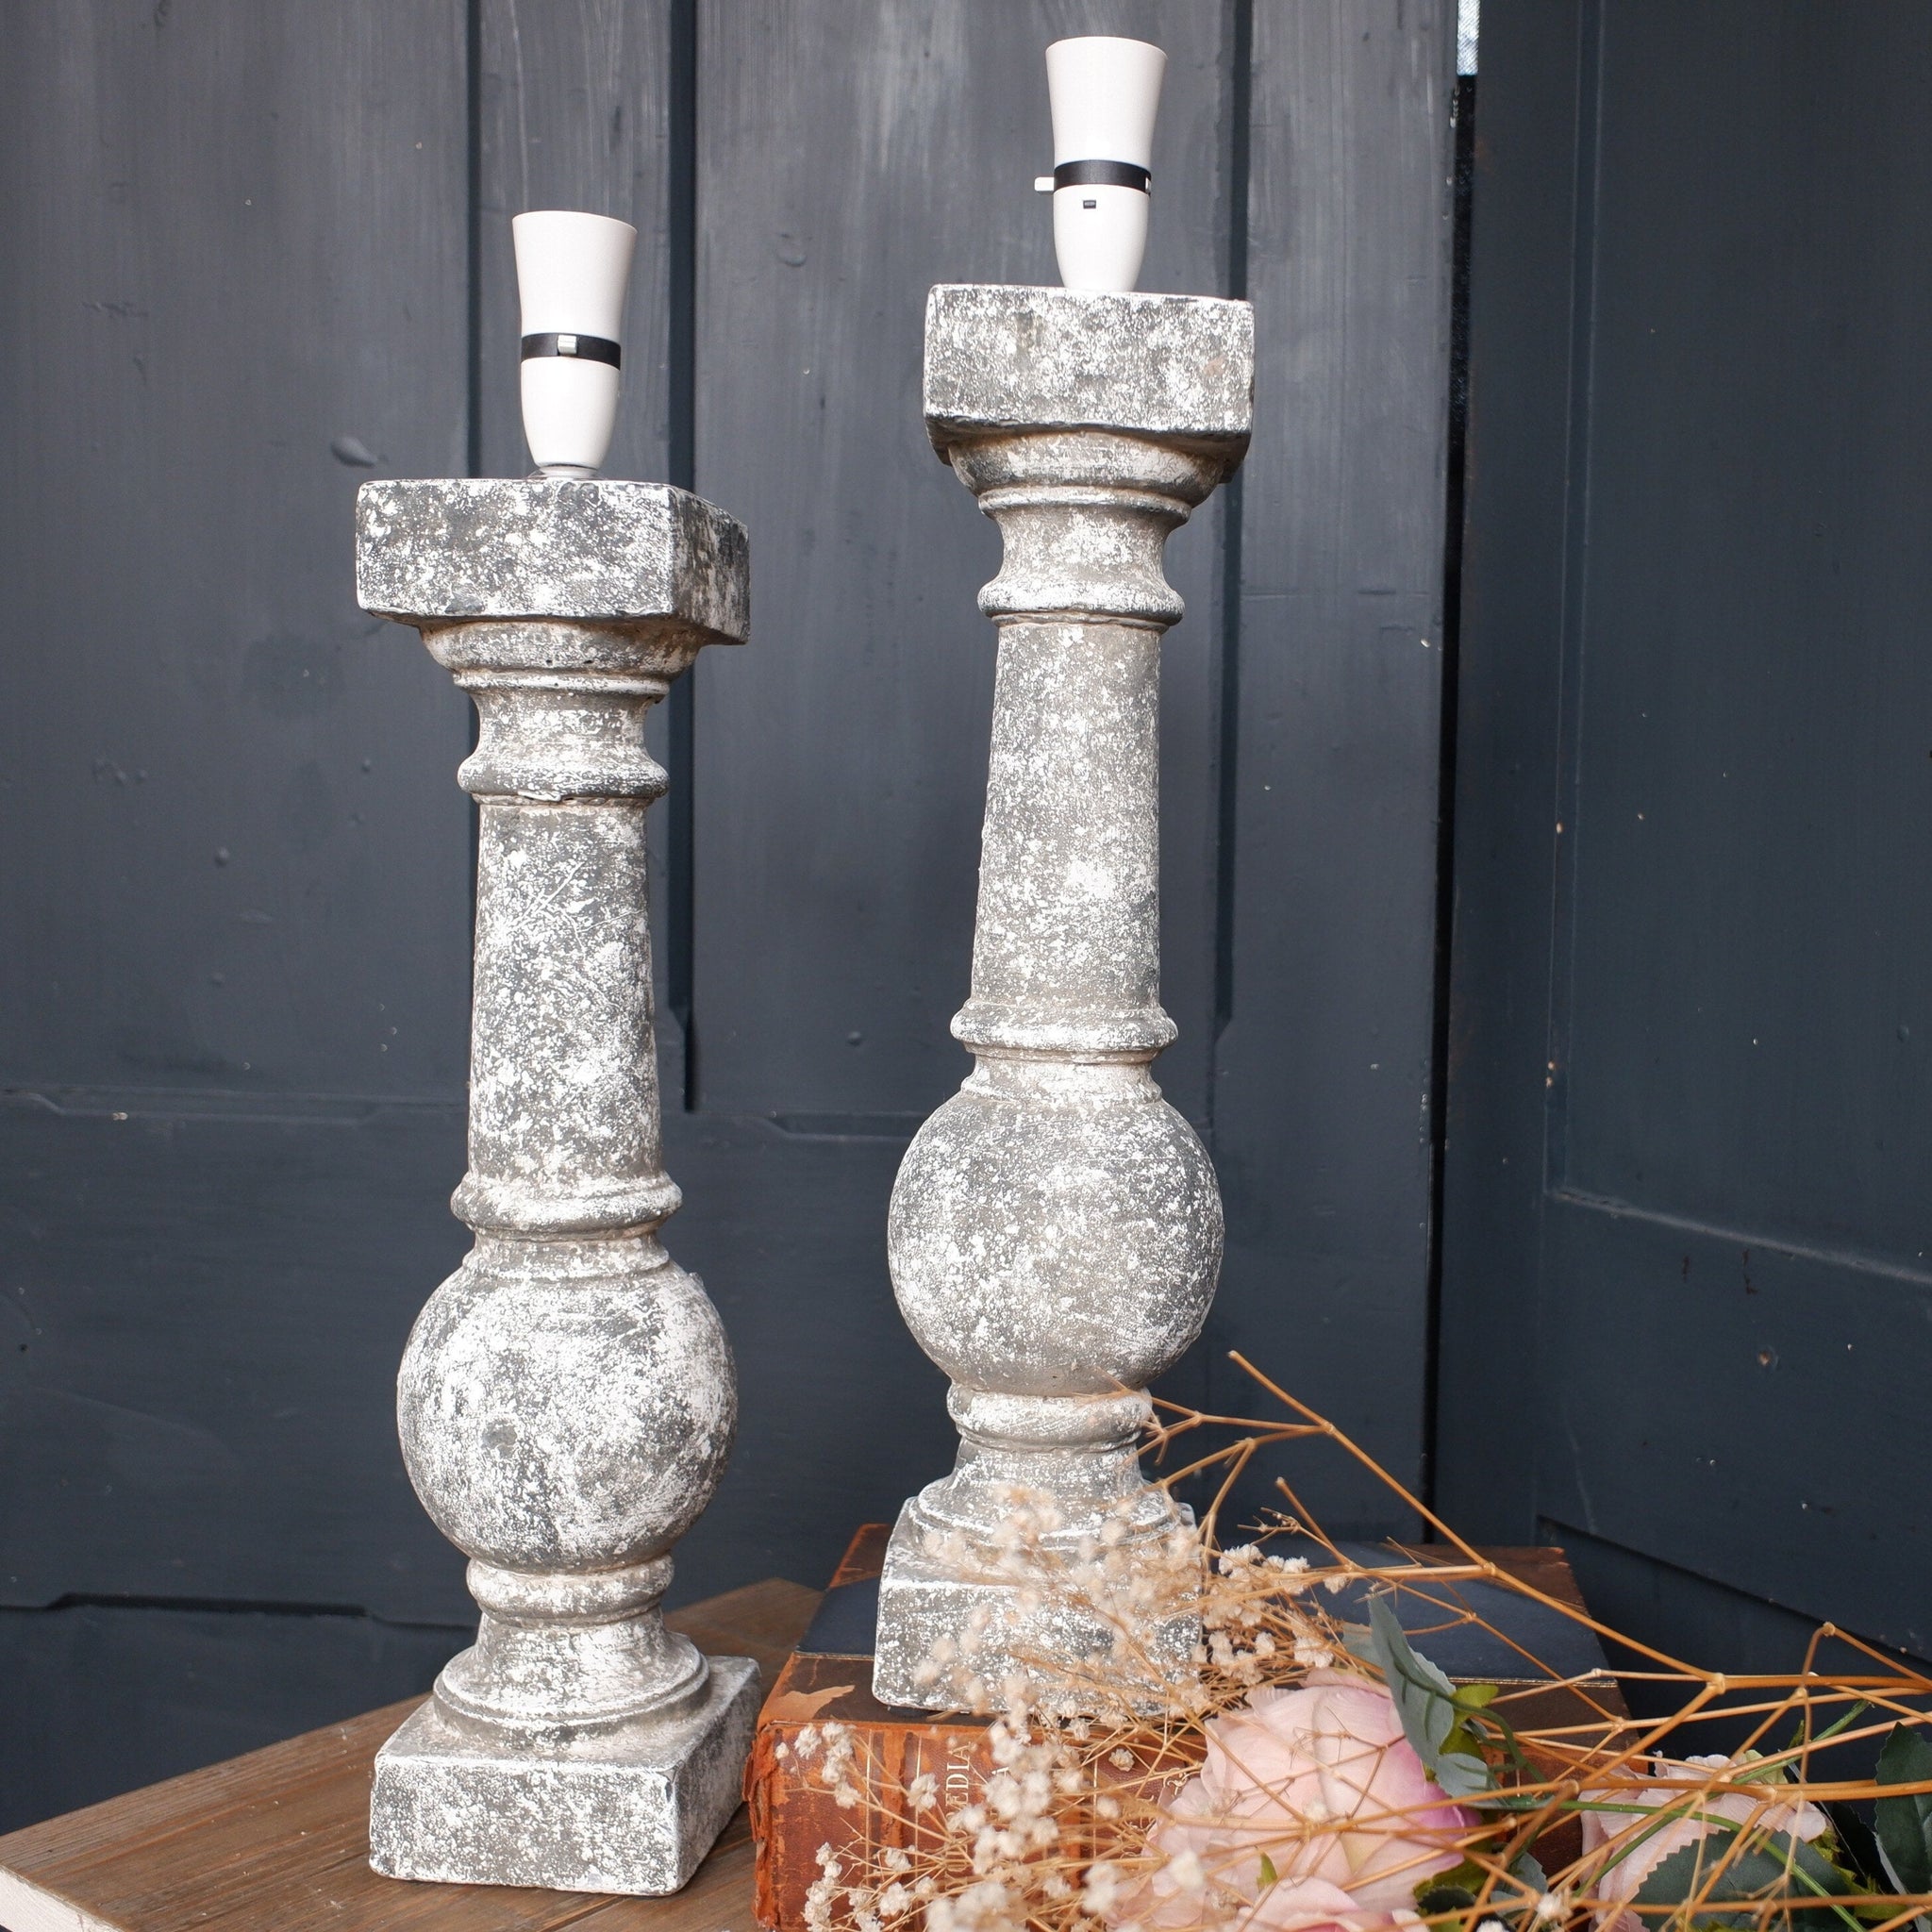 New Shabby Chic Rustic Natural Stone Column Table Lamp Base